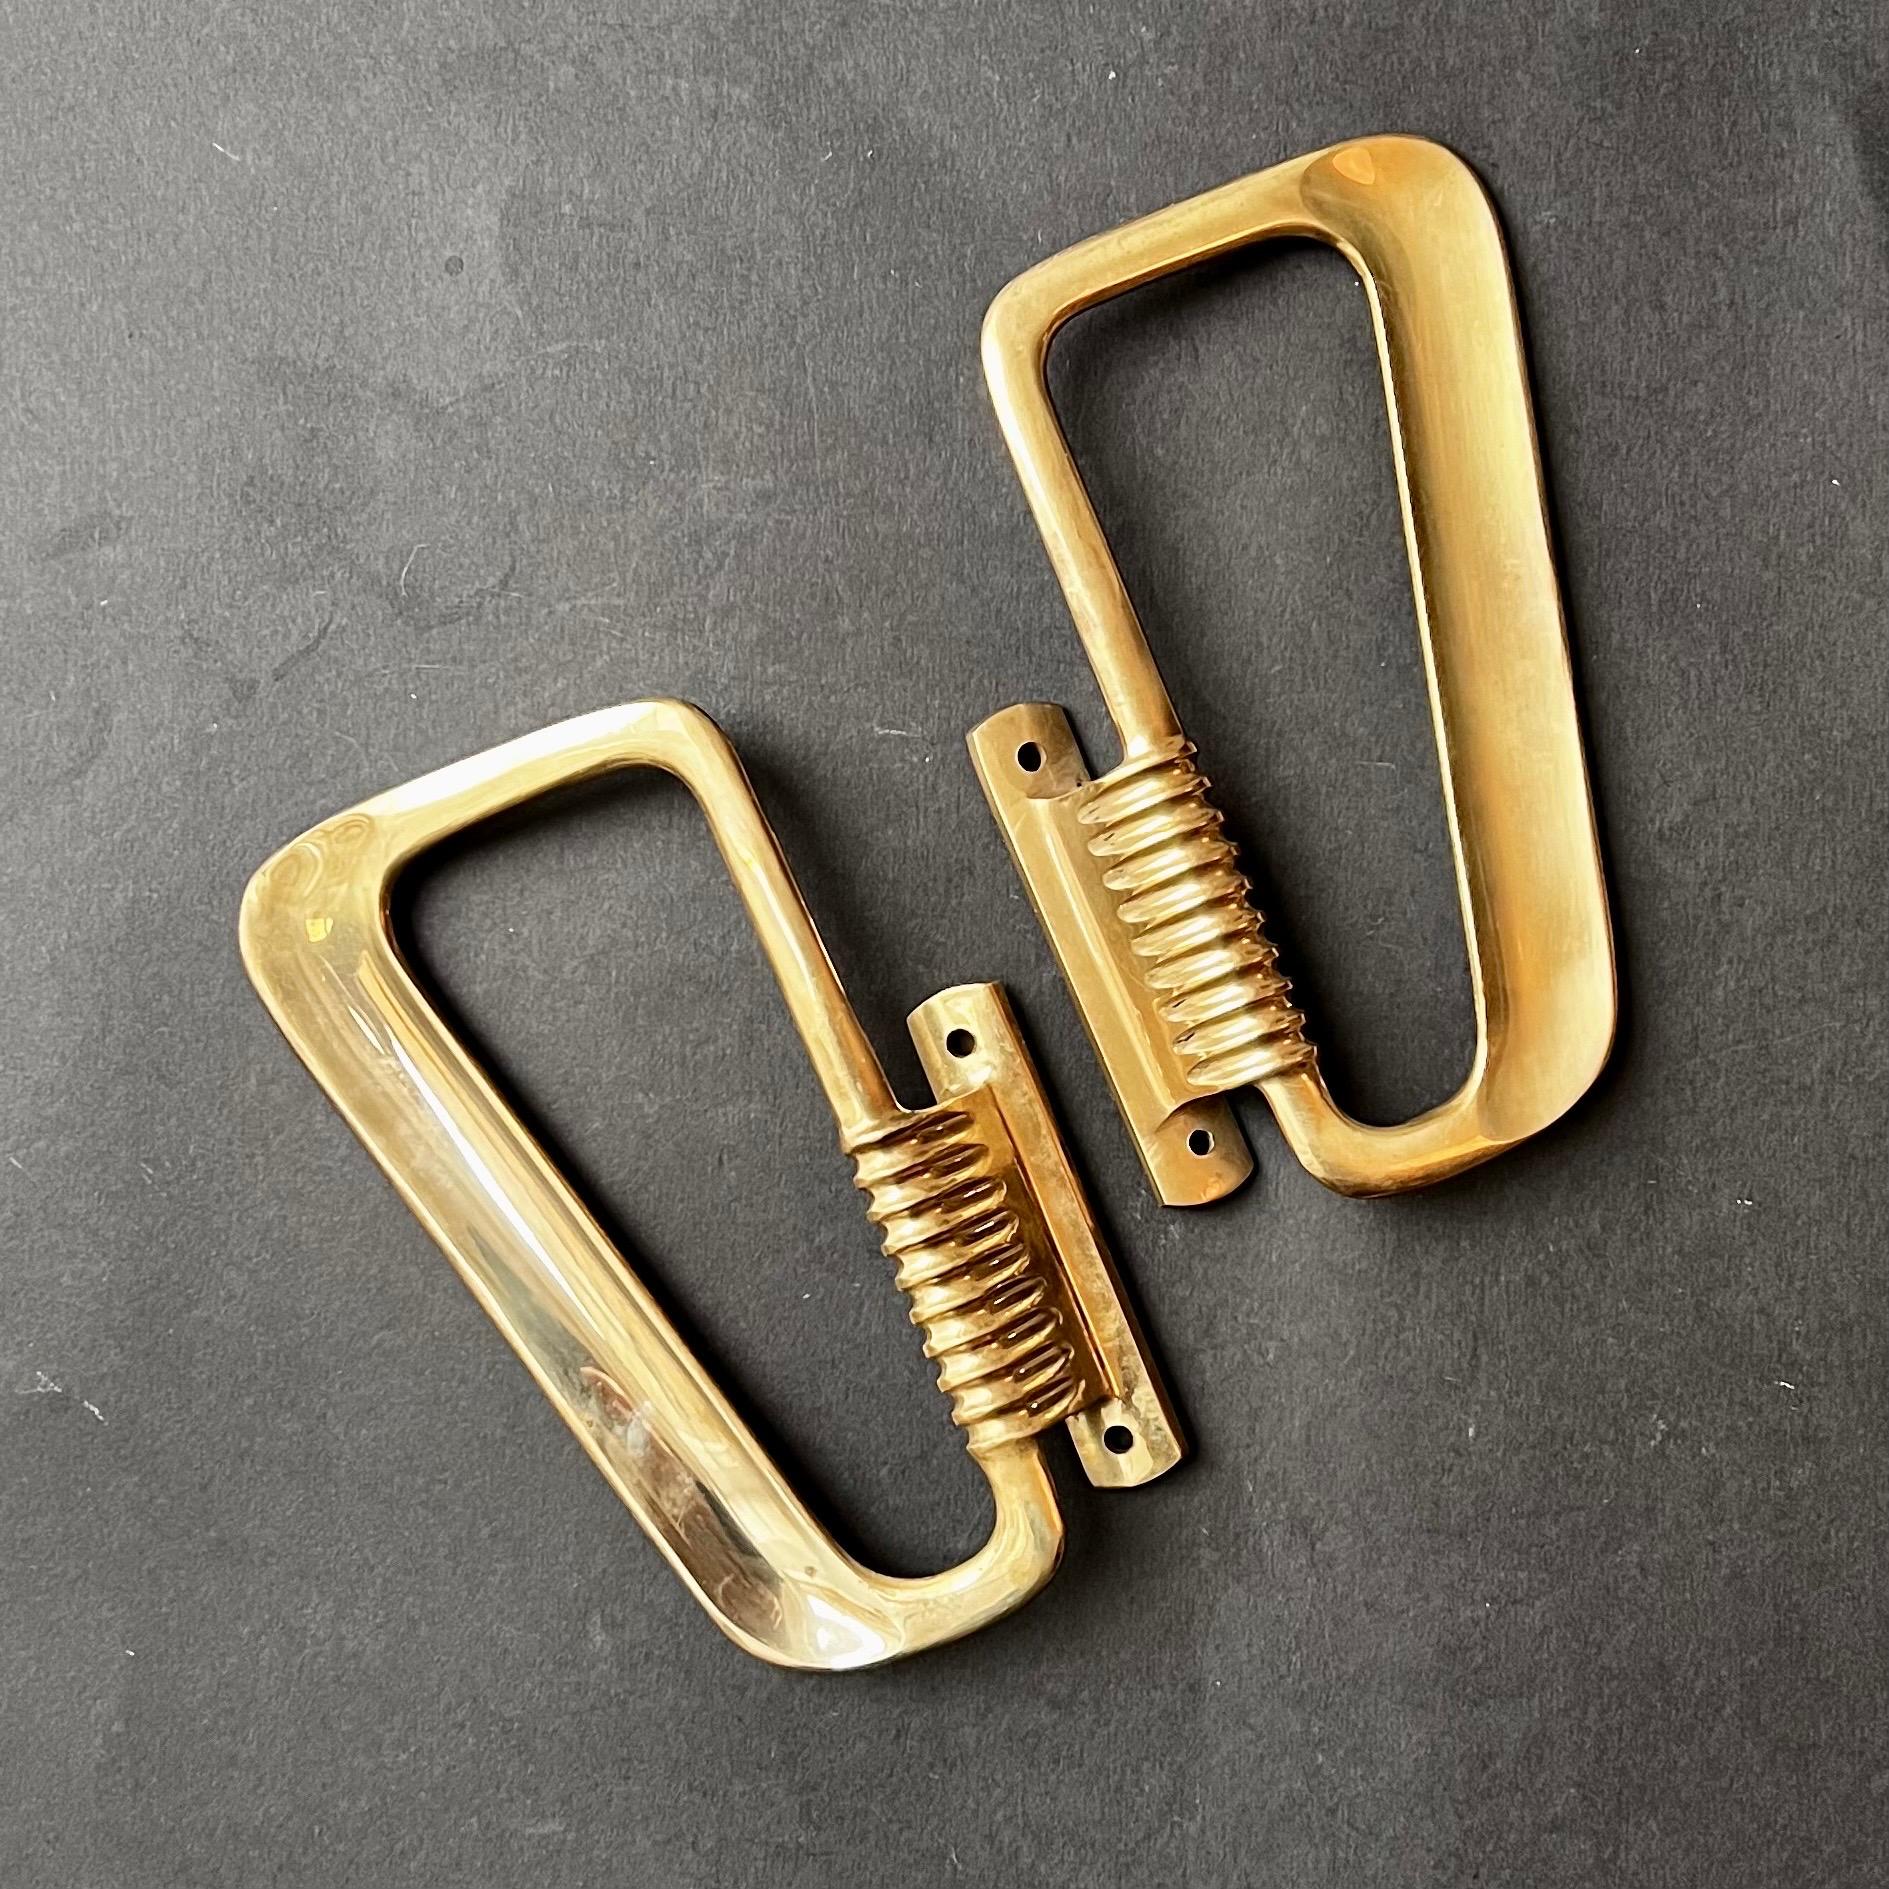 A pair of large Italian midcentury door handles of cast brass, with gentle contouring to suit their function. The pieces can be used separately or together; on double doors or opposite sides of a single door.

The handles are in good vintage